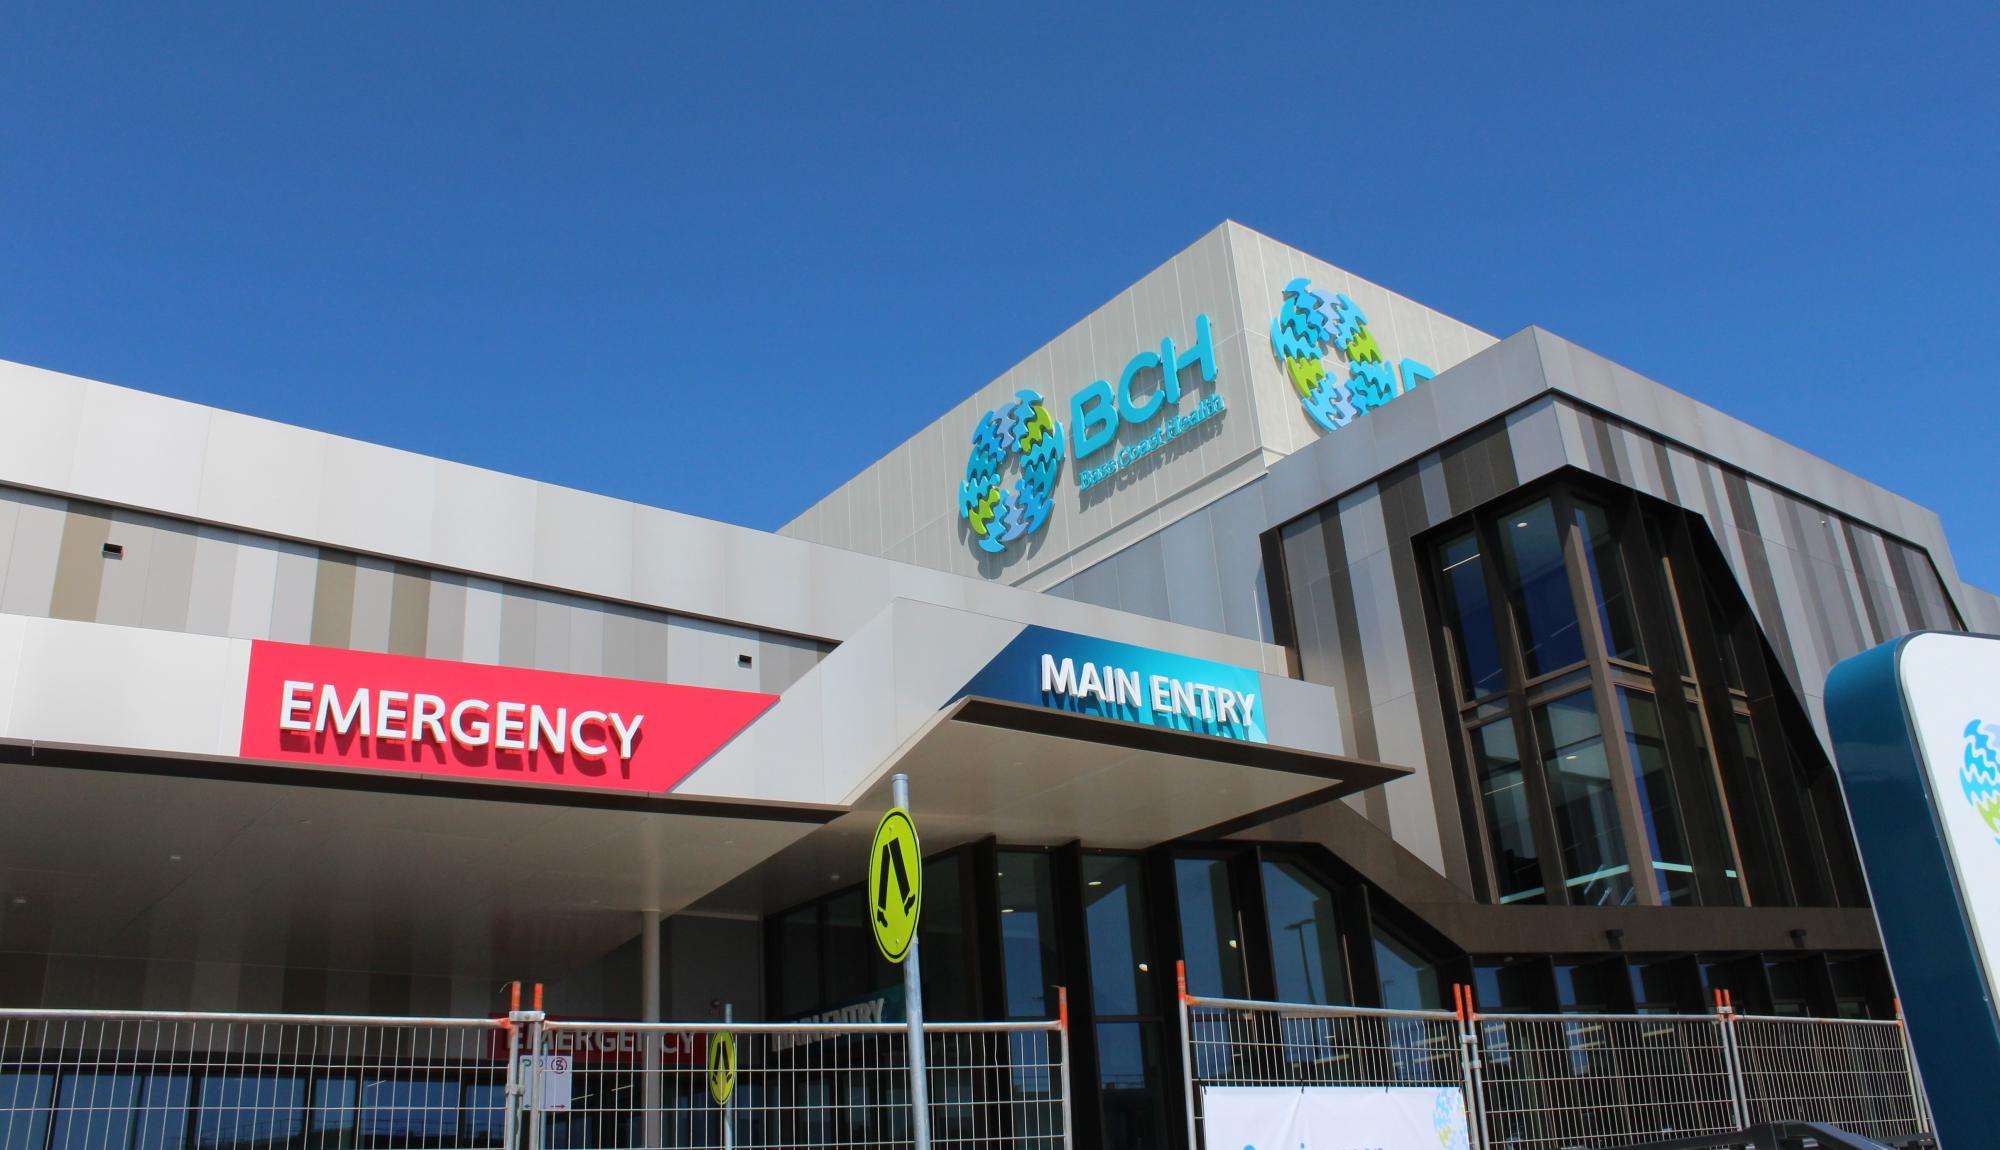 The Emergency Department is now open in the new Wonthaggi Hospital.